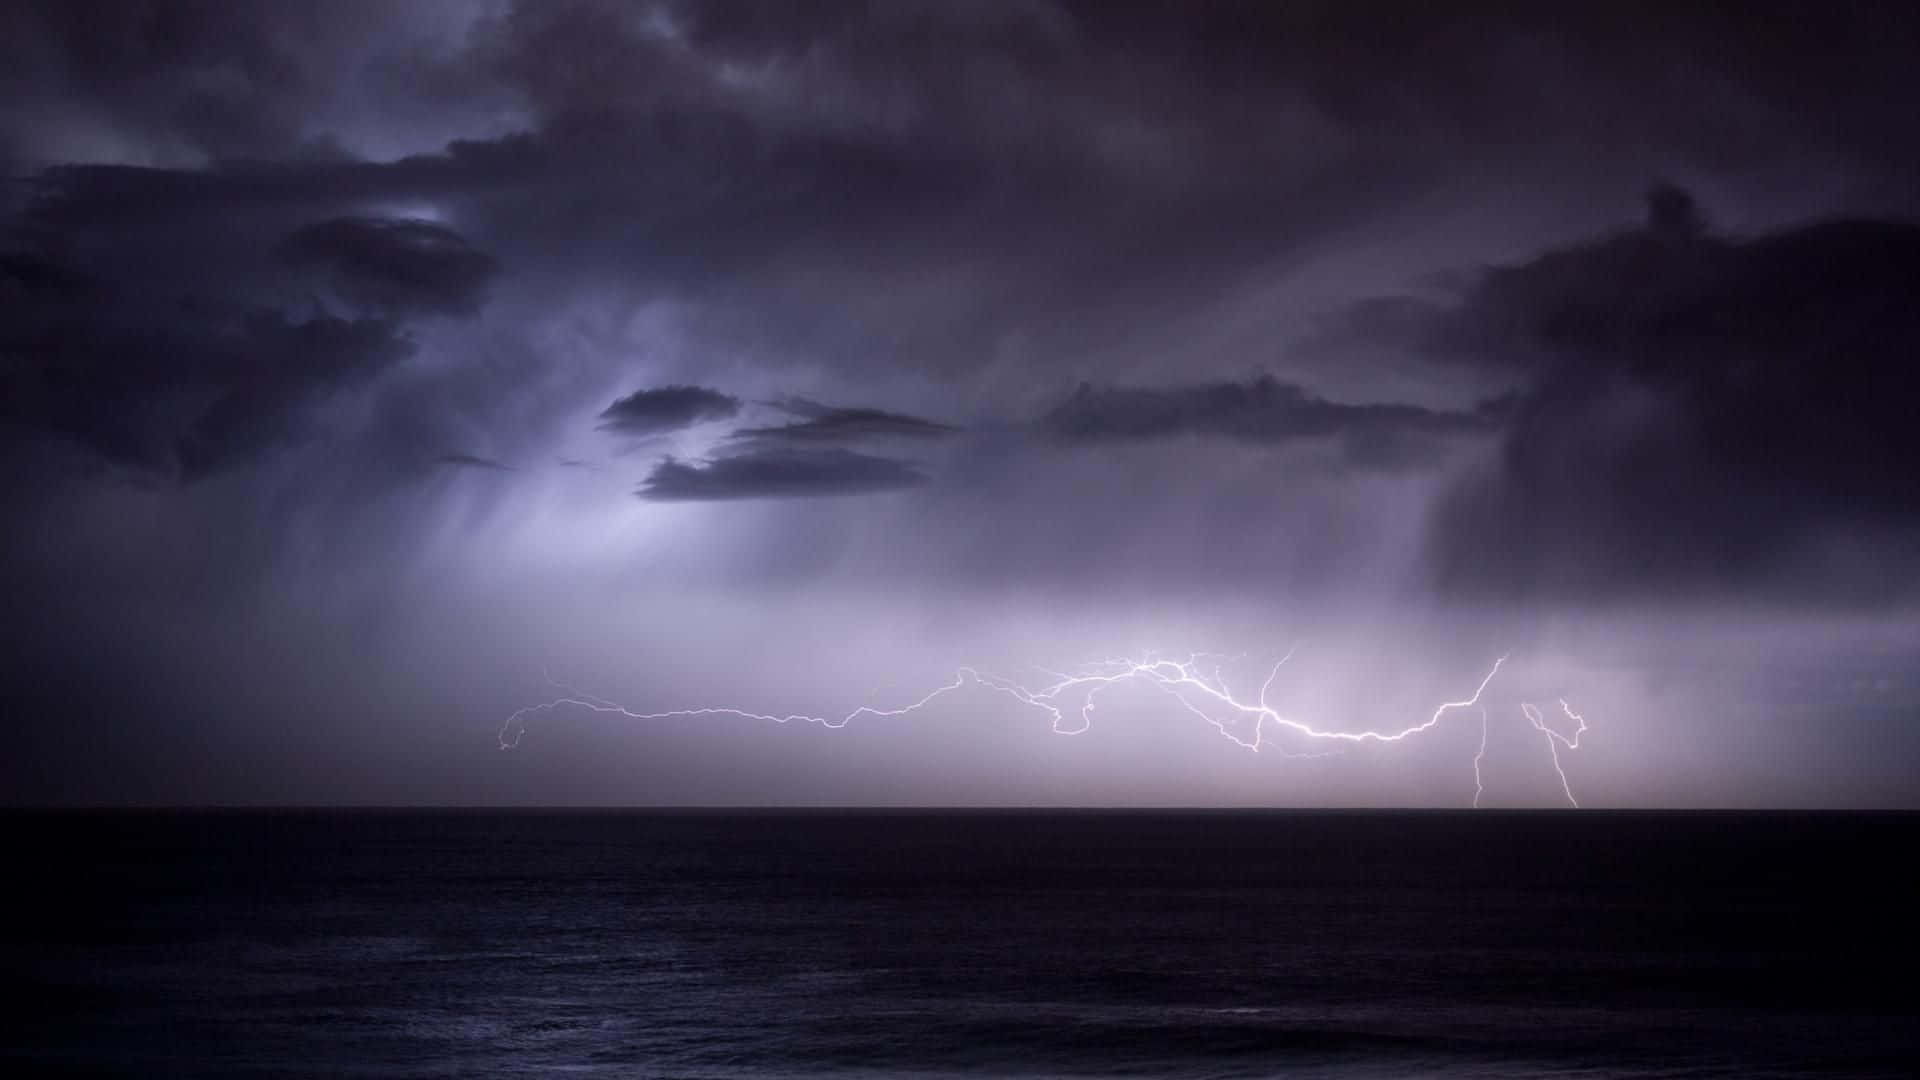 A vibrant thunderstorm produces a beautiful lightshow